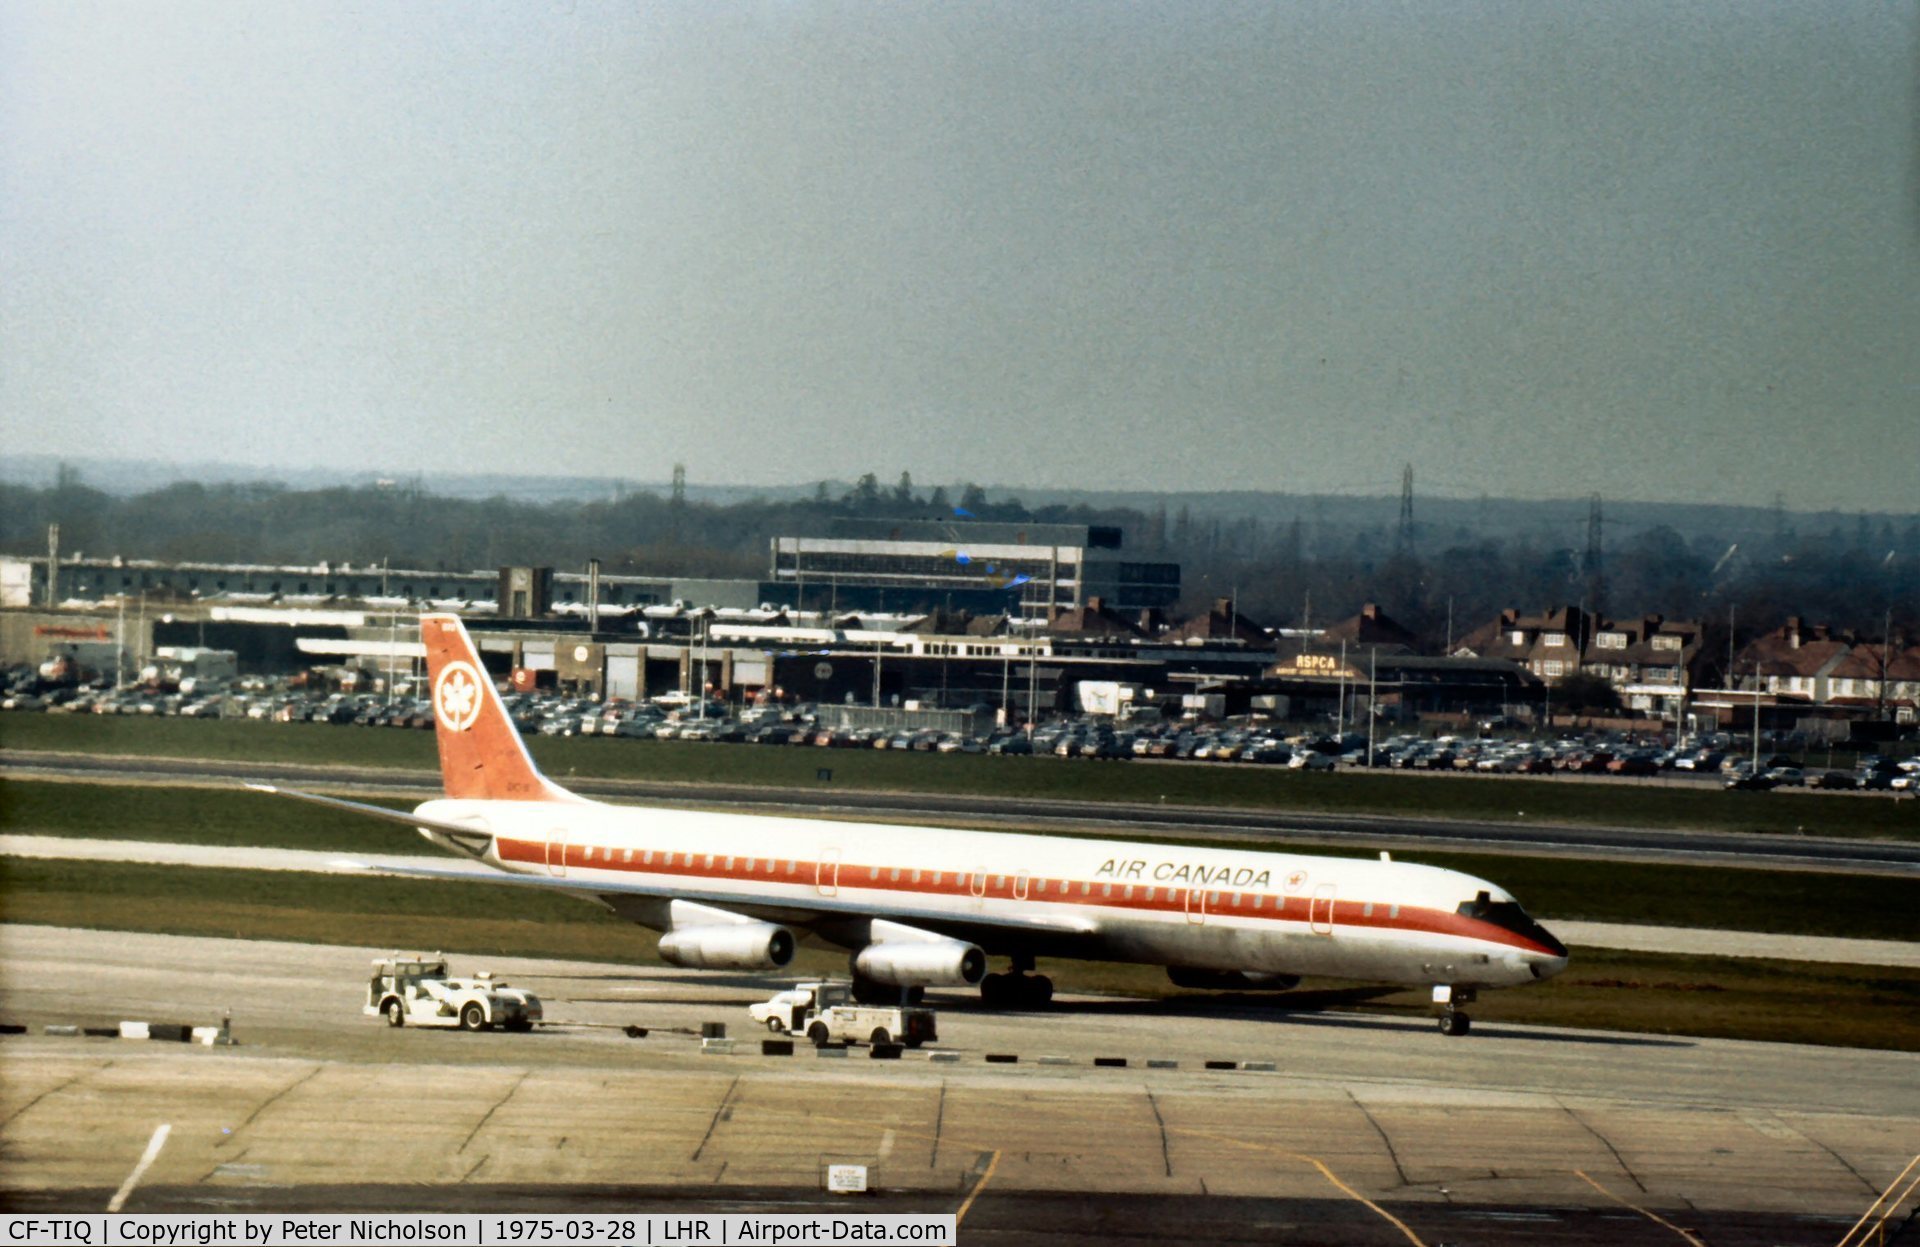 CF-TIQ, 1970 Douglas DC-8-63 C/N 46123, DC-8-63 of Air Canada taxying to the terminal at Heathrow in March 1975.